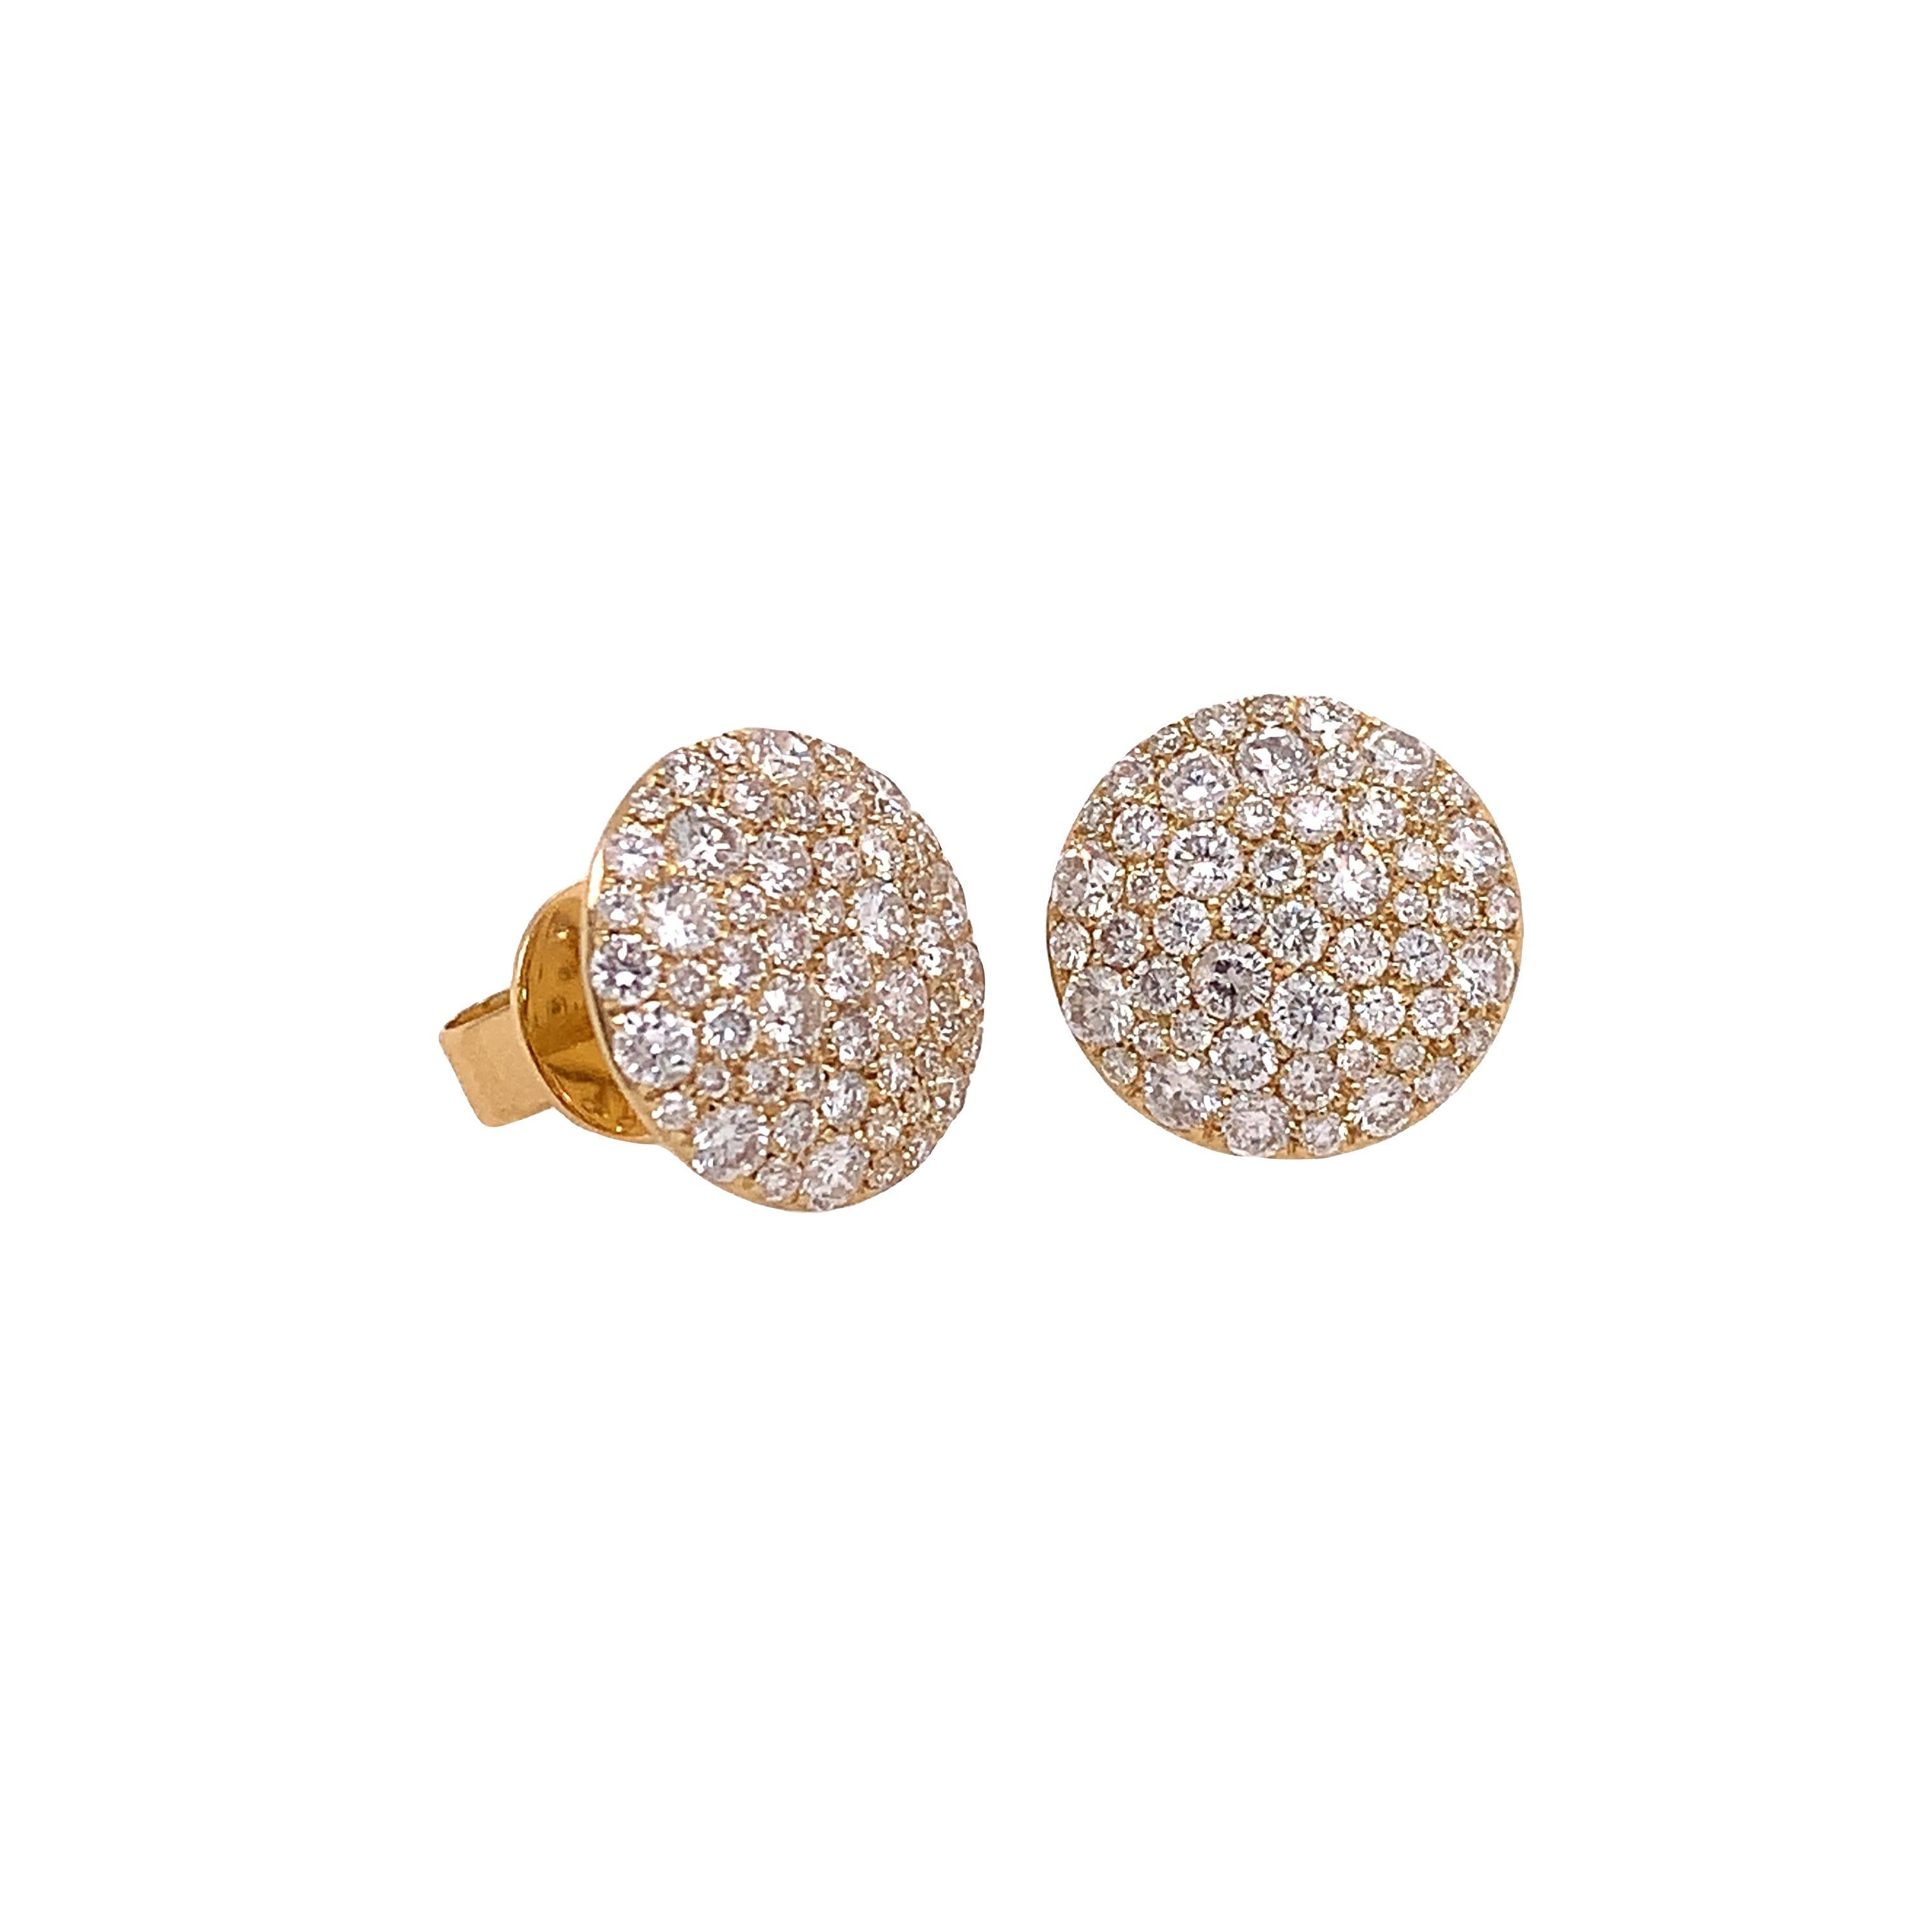 PA-VEY Collection

These on-trend earrings feature mini discs of 18k yellow gold studded with delicate pavé-set Diamonds for a modern update to the classic diamond stud.

Diamond: 1.24ct total weight.
All diamonds are G-H/SI stones.